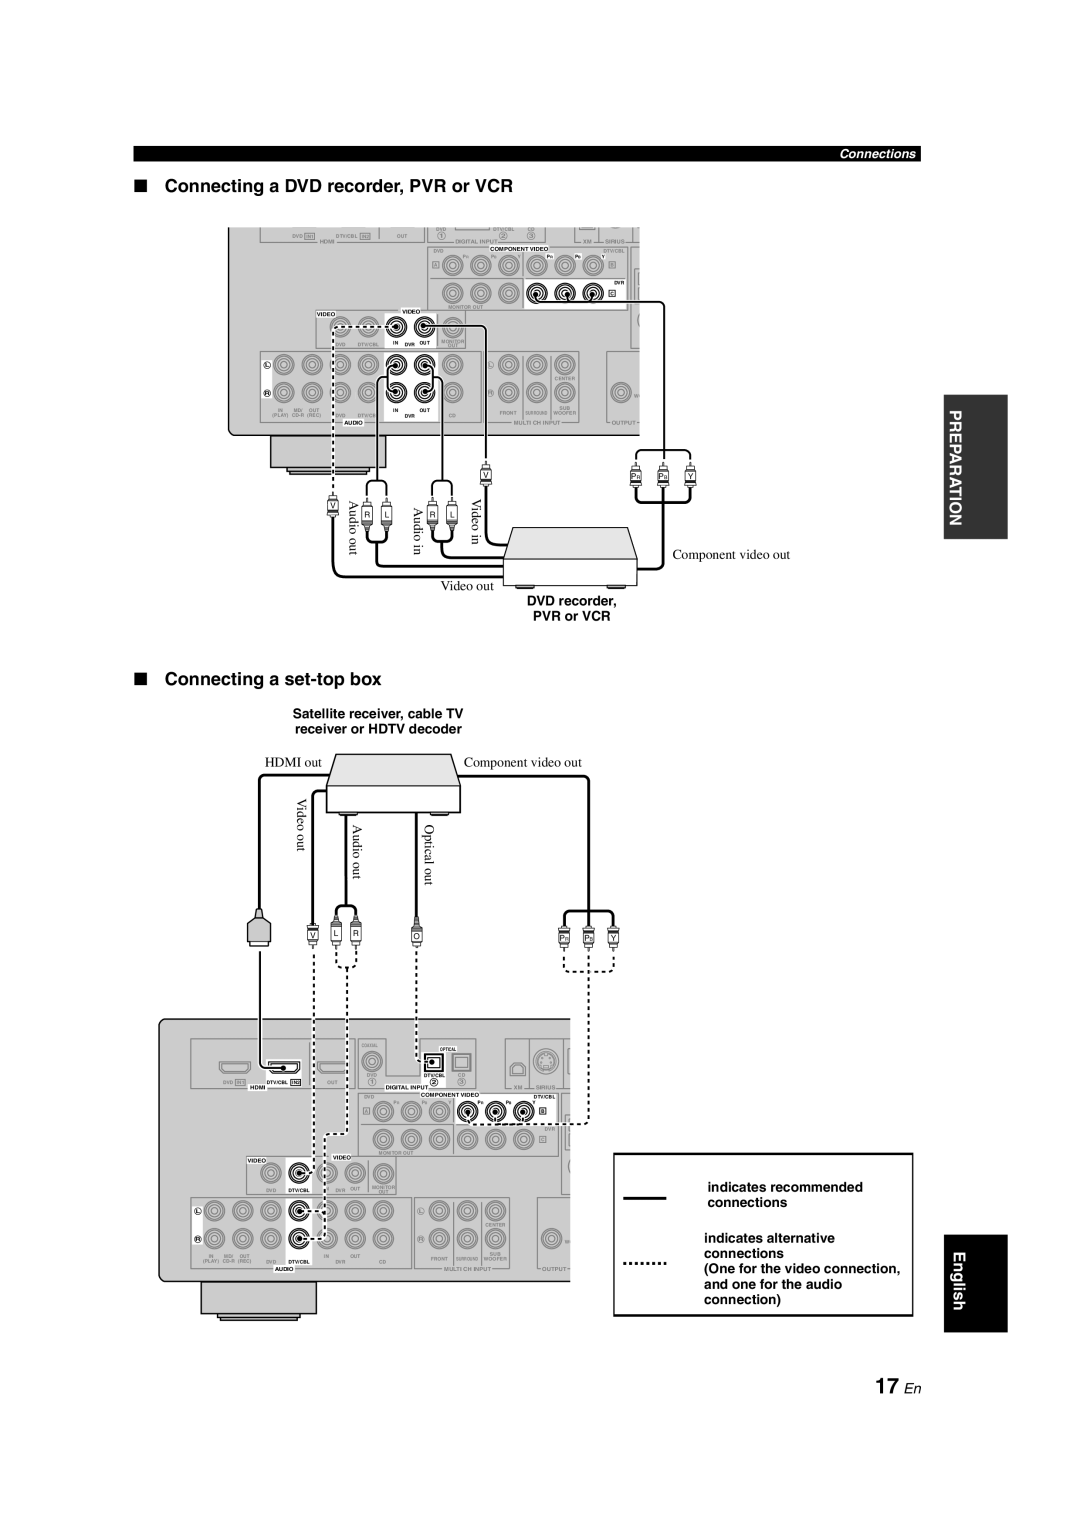 Yamaha RX-V463 owner manual 17 En, Connecting a DVD recorder, PVR or VCR, Connecting a set-topbox, Connections 